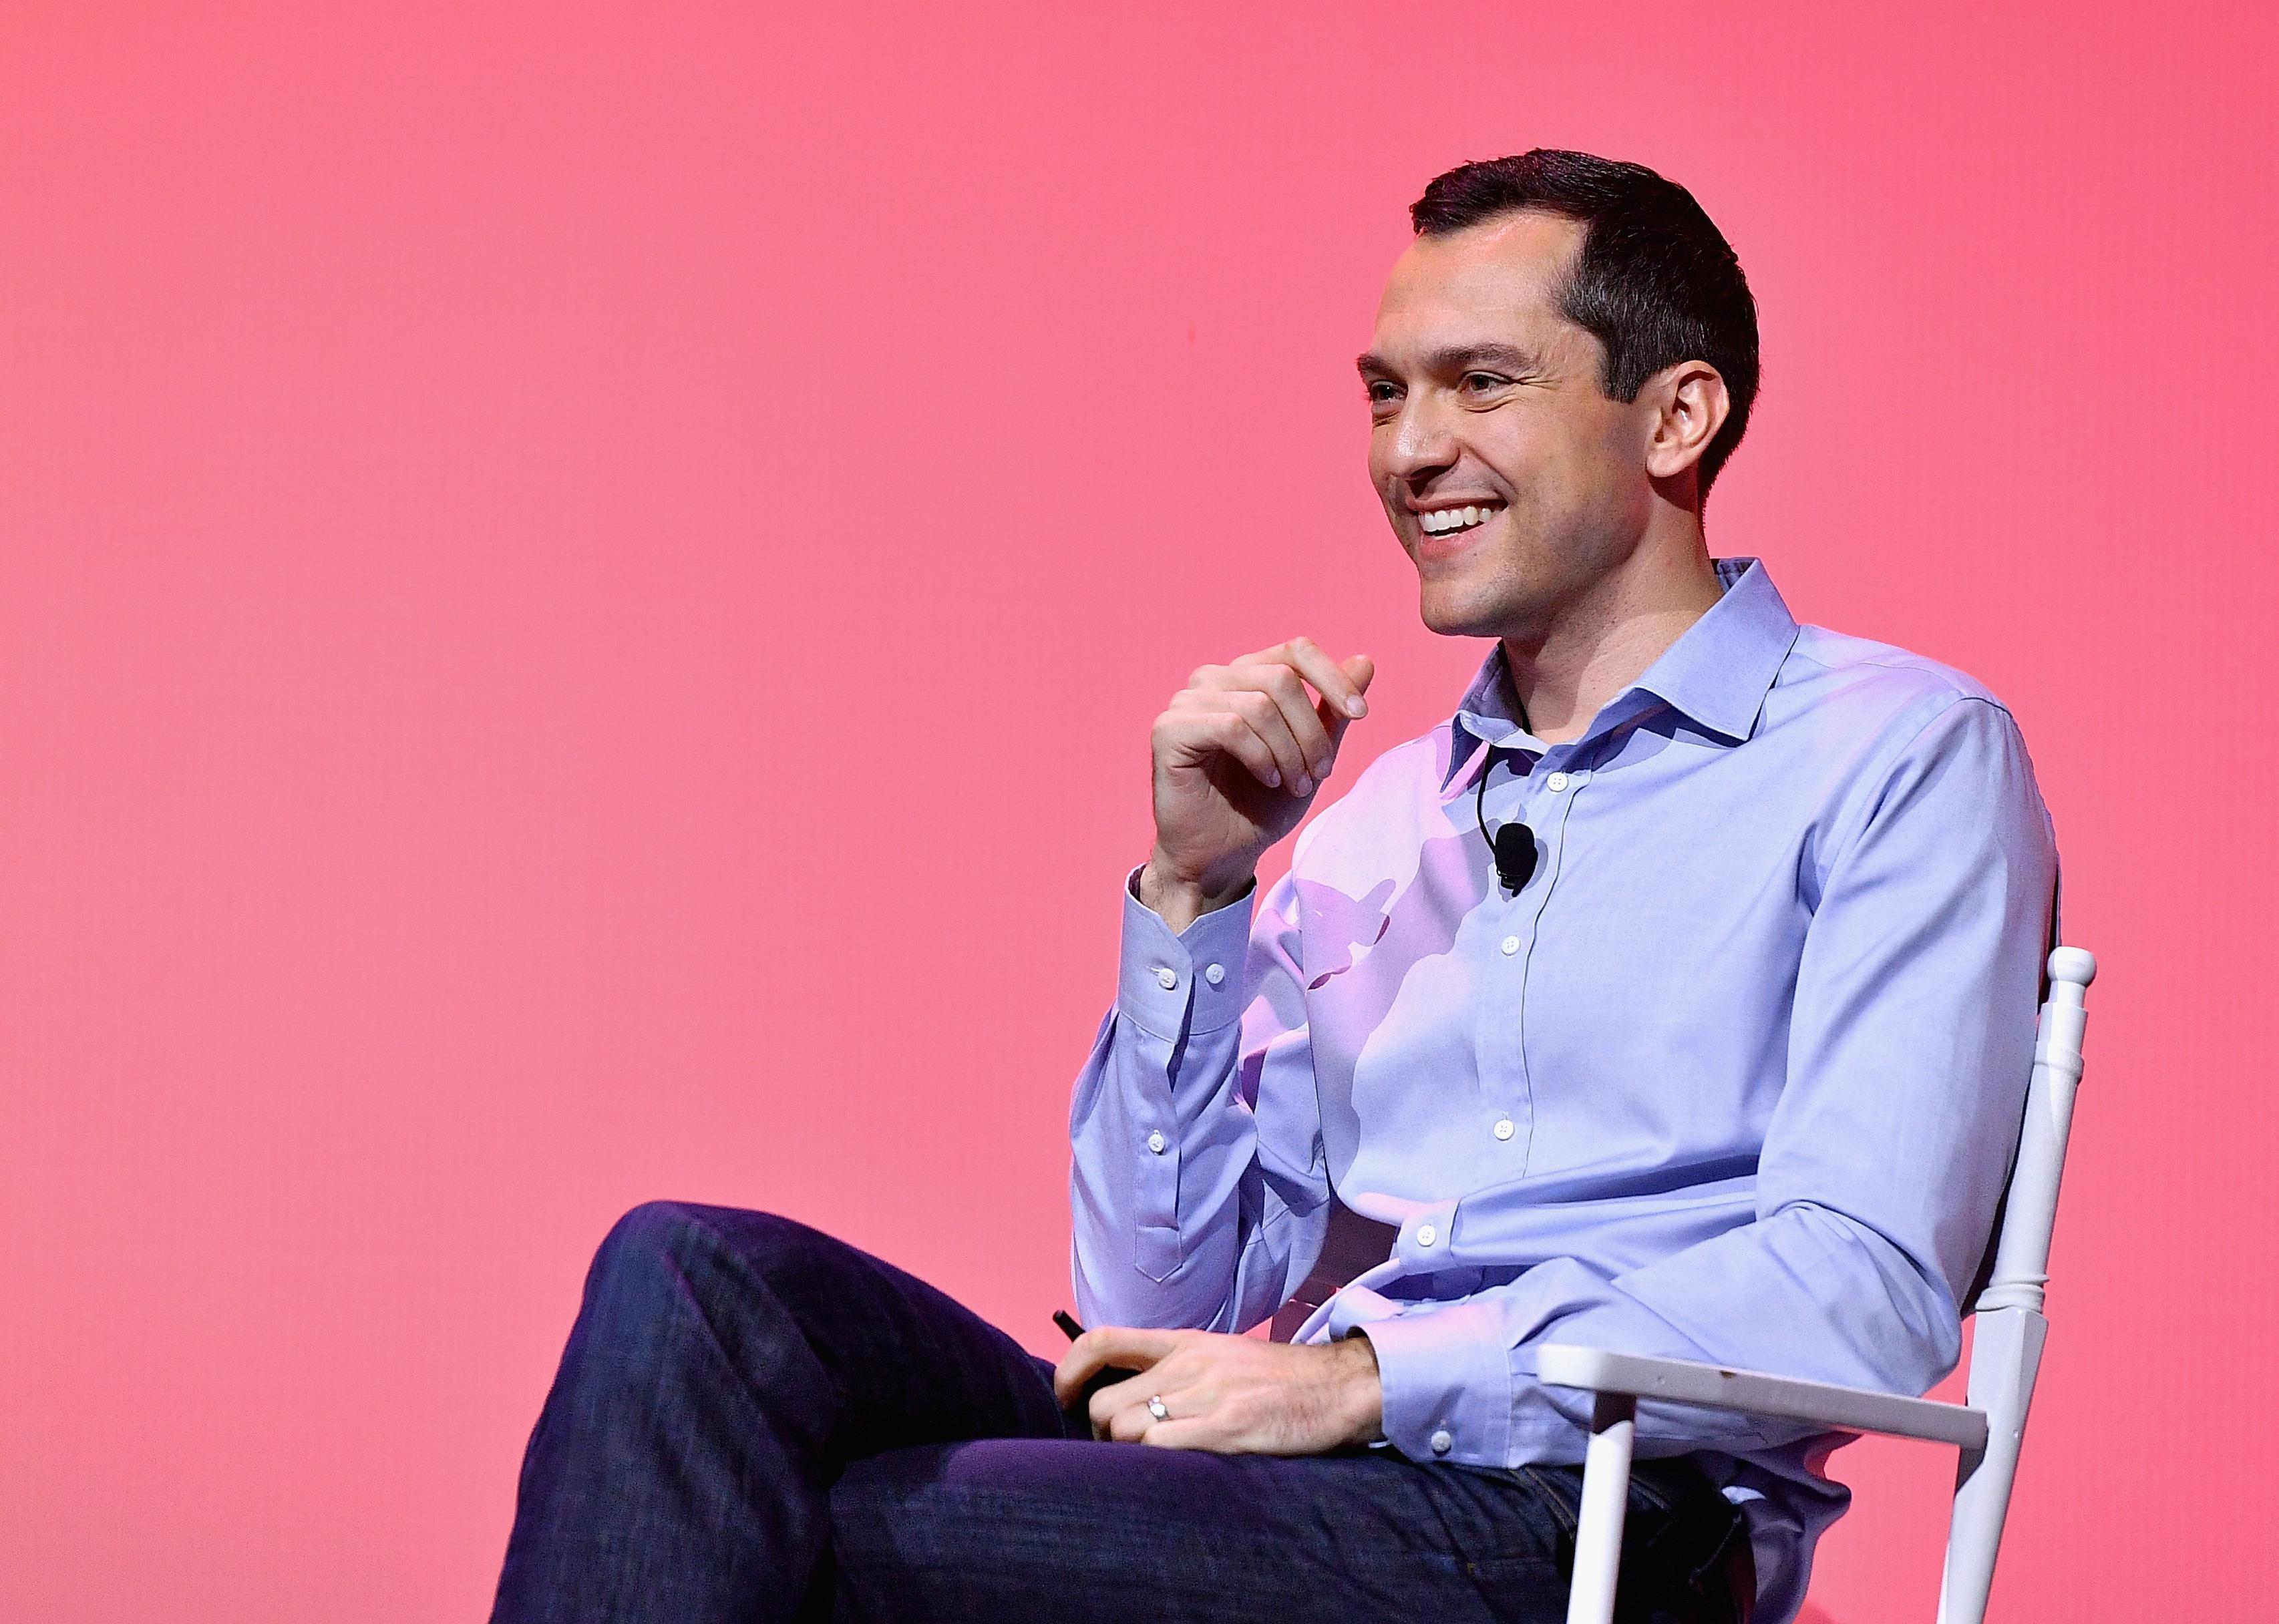 Nathan Blecharczyk in front of a pink background.